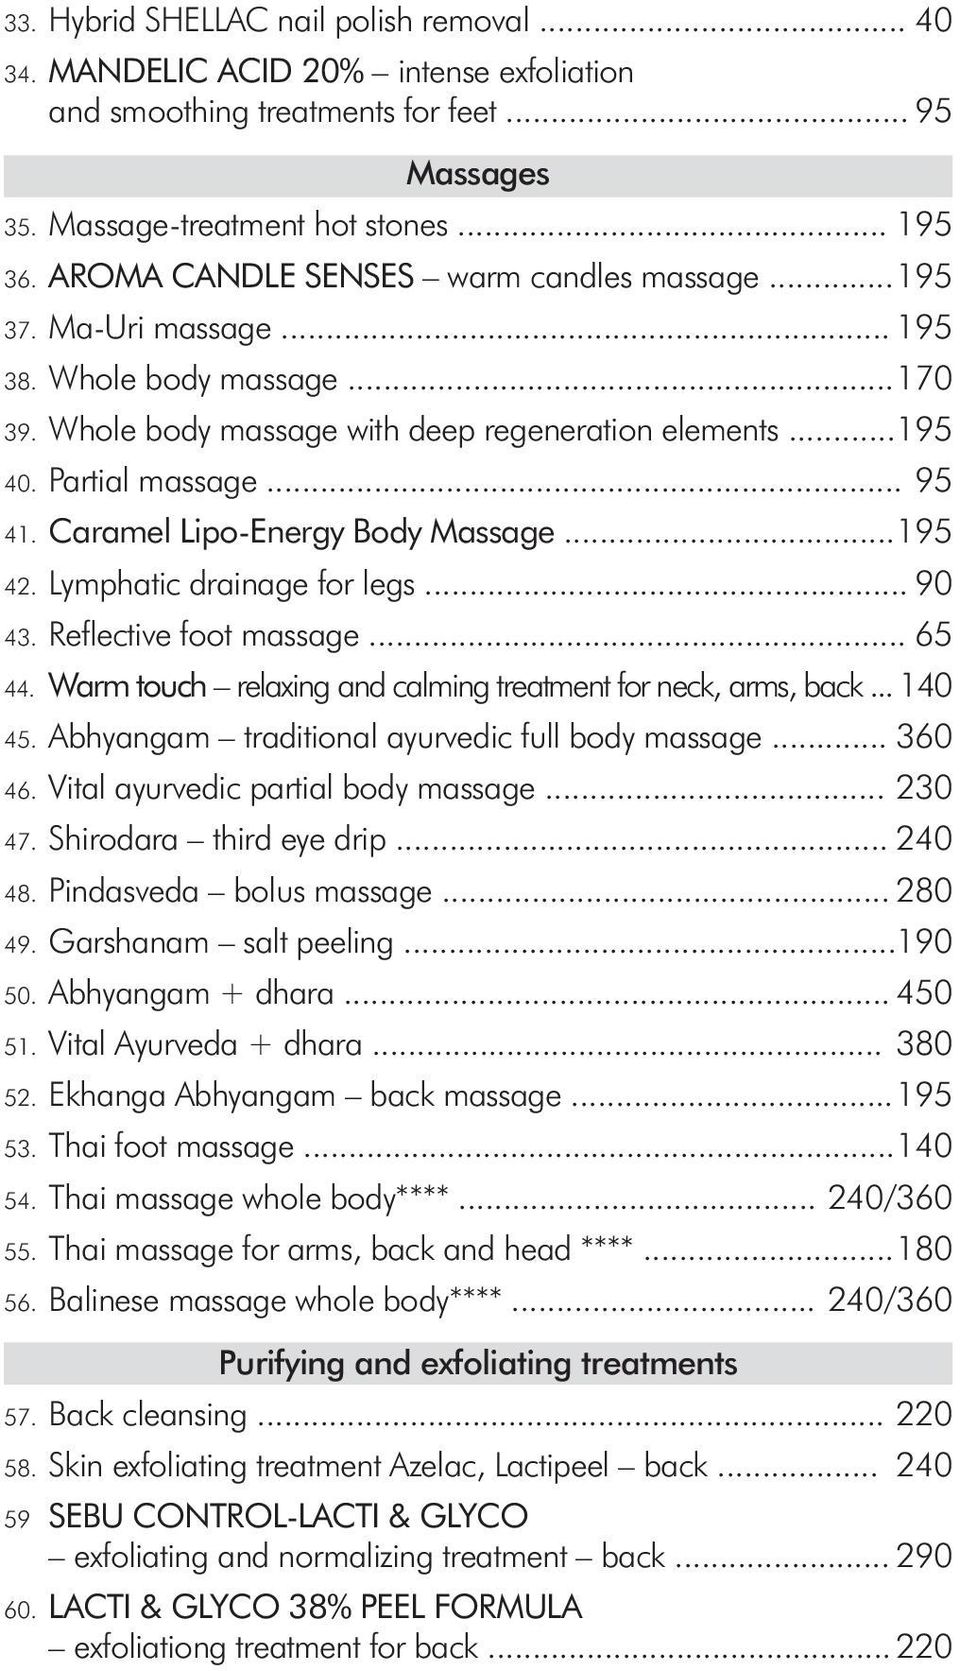 Caramel Lipo-Energy Body Massage... 195 42. Lymphatic drainage for legs... 90 43. Refl ective foot massage... 65 44. Warm touch relaxing and calming treatment for neck, arms, back... 140 45.